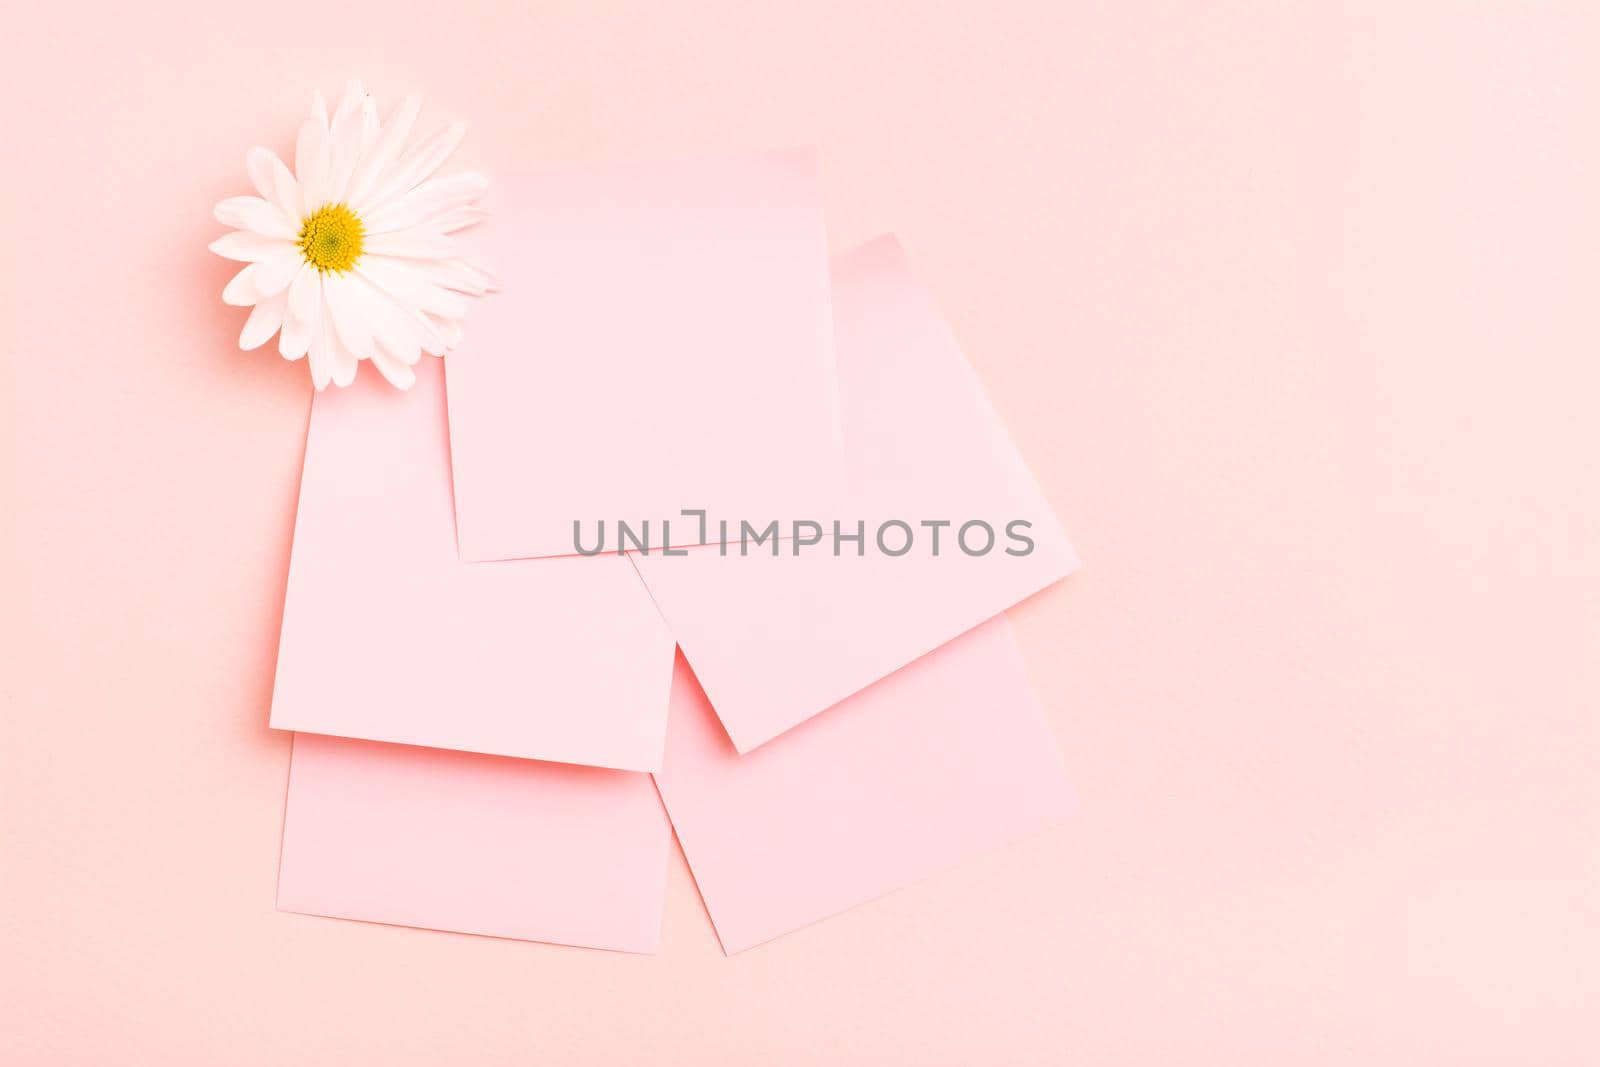 The concept is pink. Blank square small writing sheets and chrysanthemum on a pink background. Top view by Aleruana